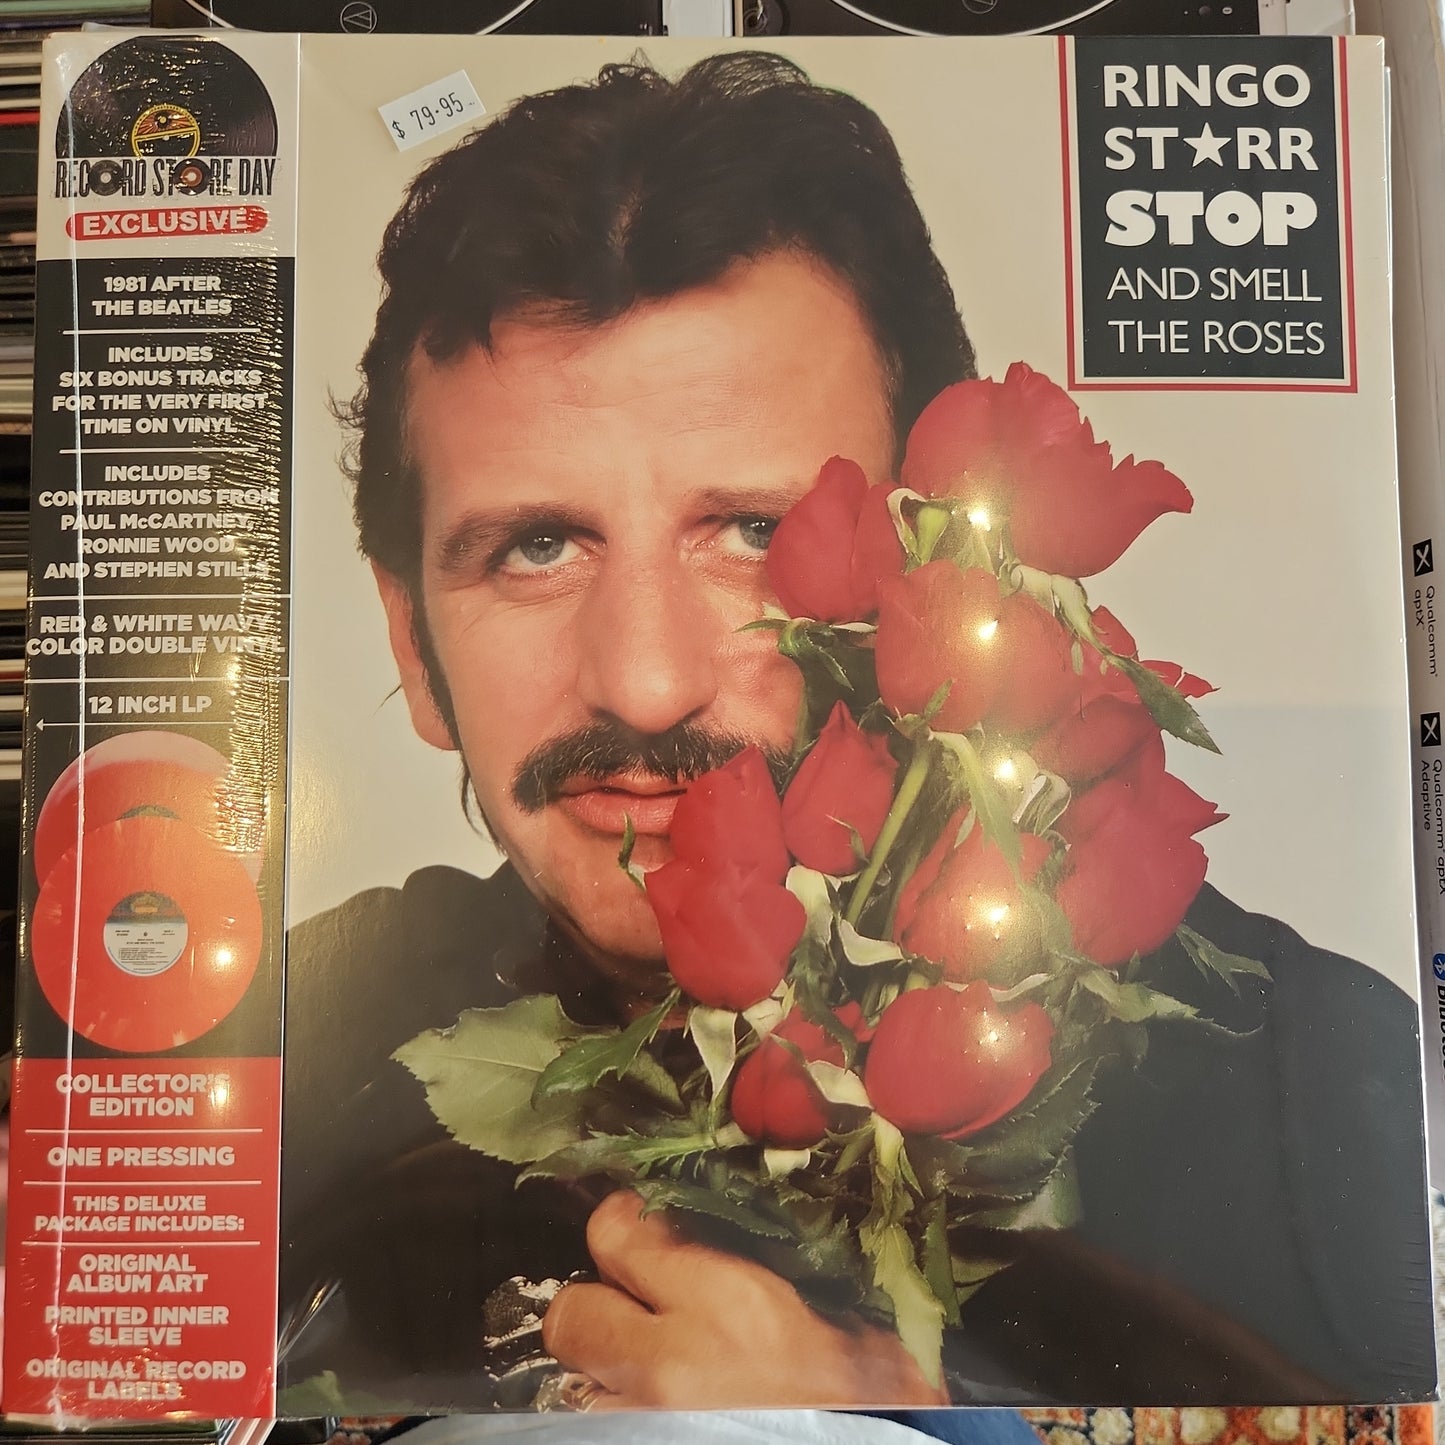 Ringo Starr - Stop and Smell the Roses - Limited Colour Vinyl LP